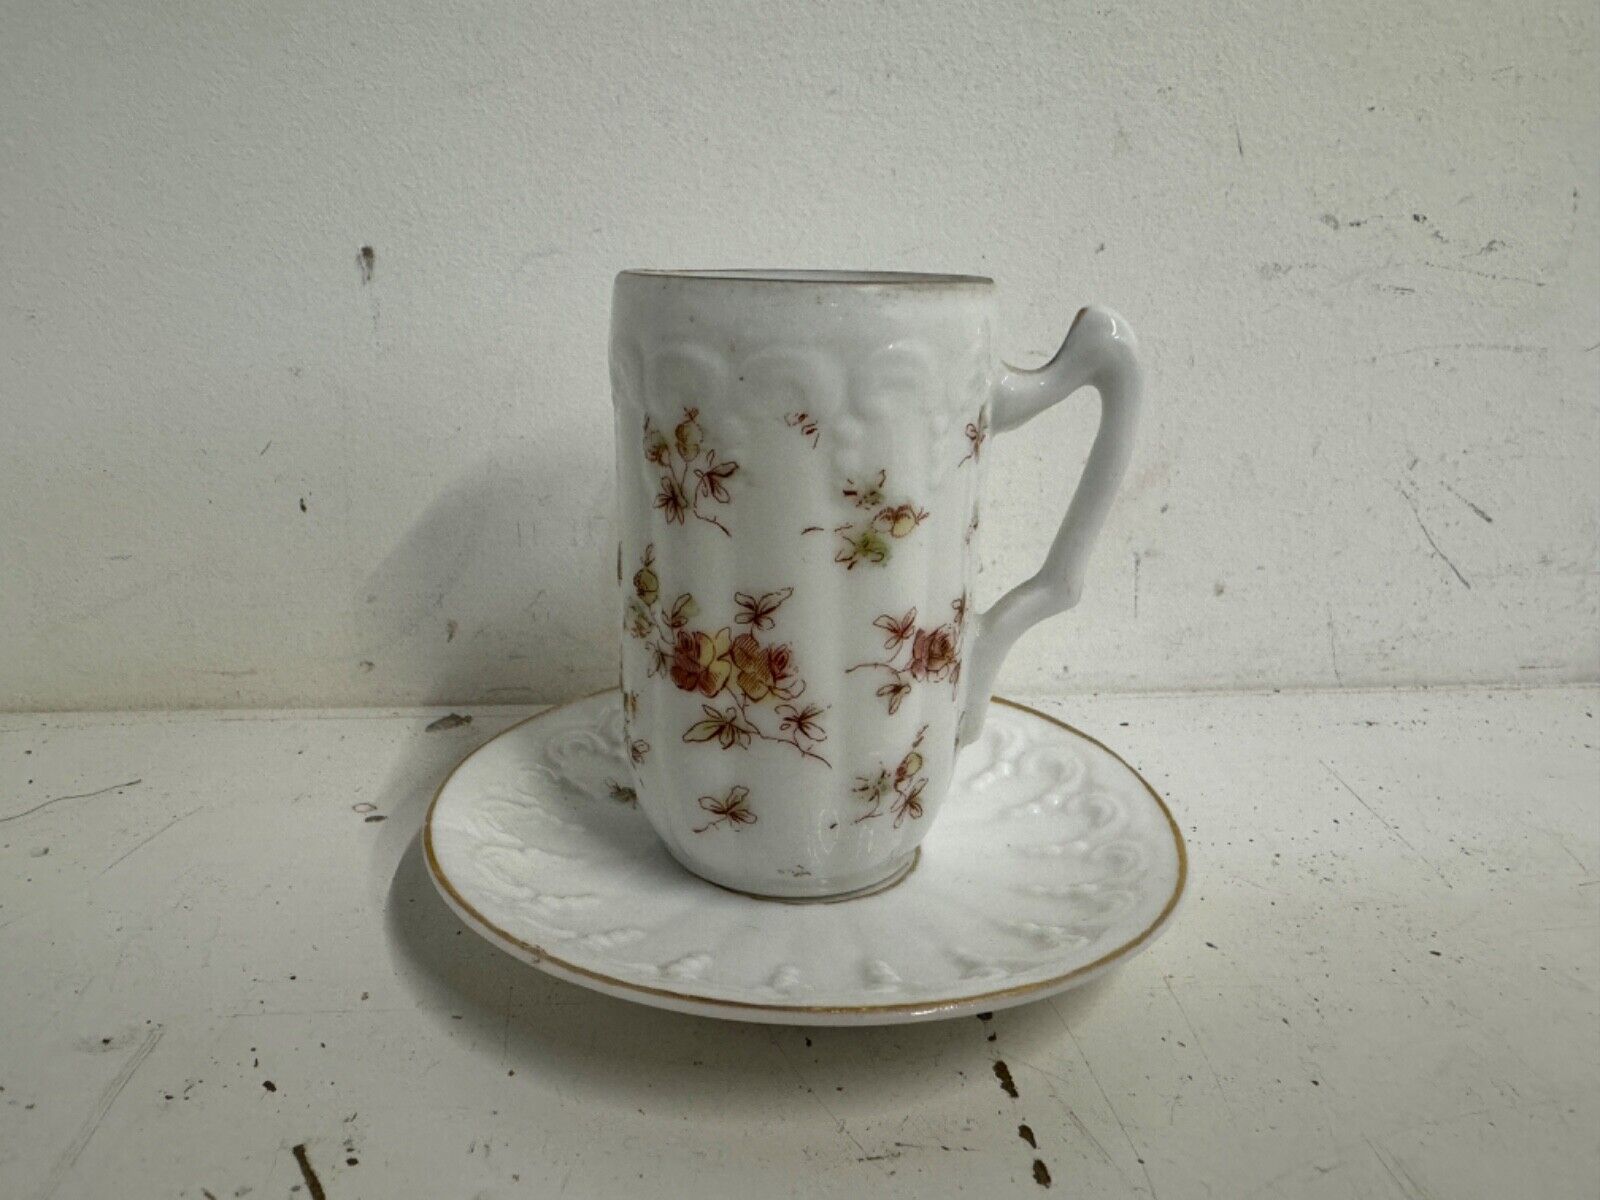 Antique Porcelain Demitasse and Saucer with Multicolored Floral Decorations